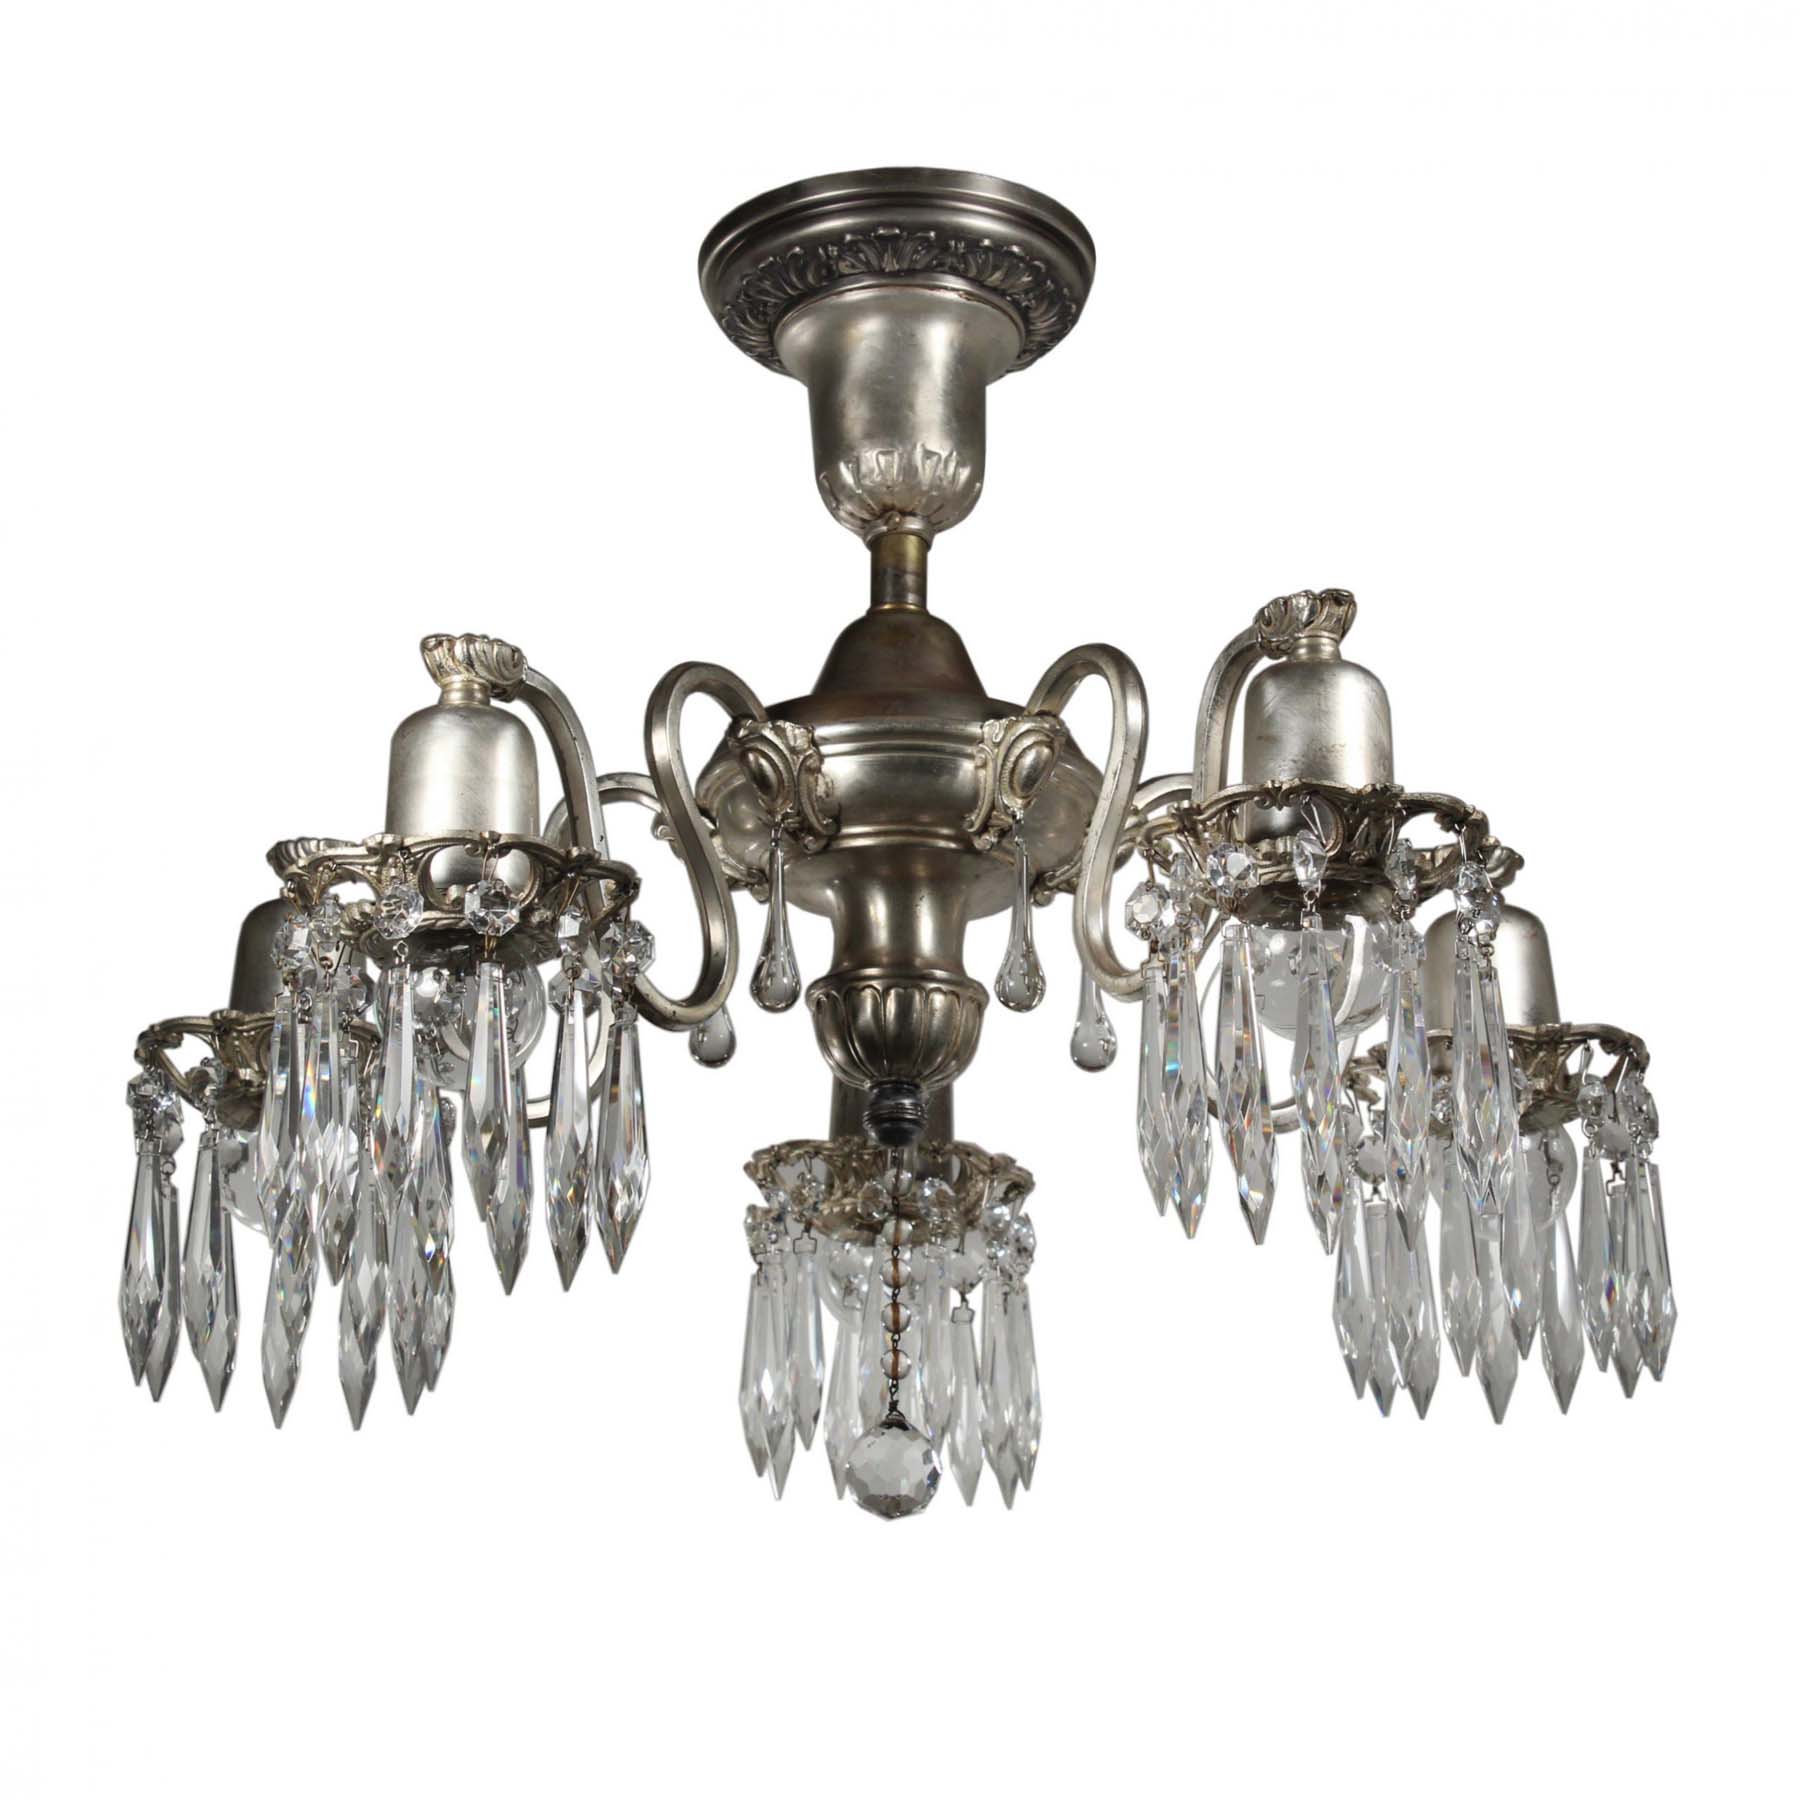 SOLD Antique Neoclassical Five-Light Semi-Flush Chandelier with Prisms, Silver Plate-0